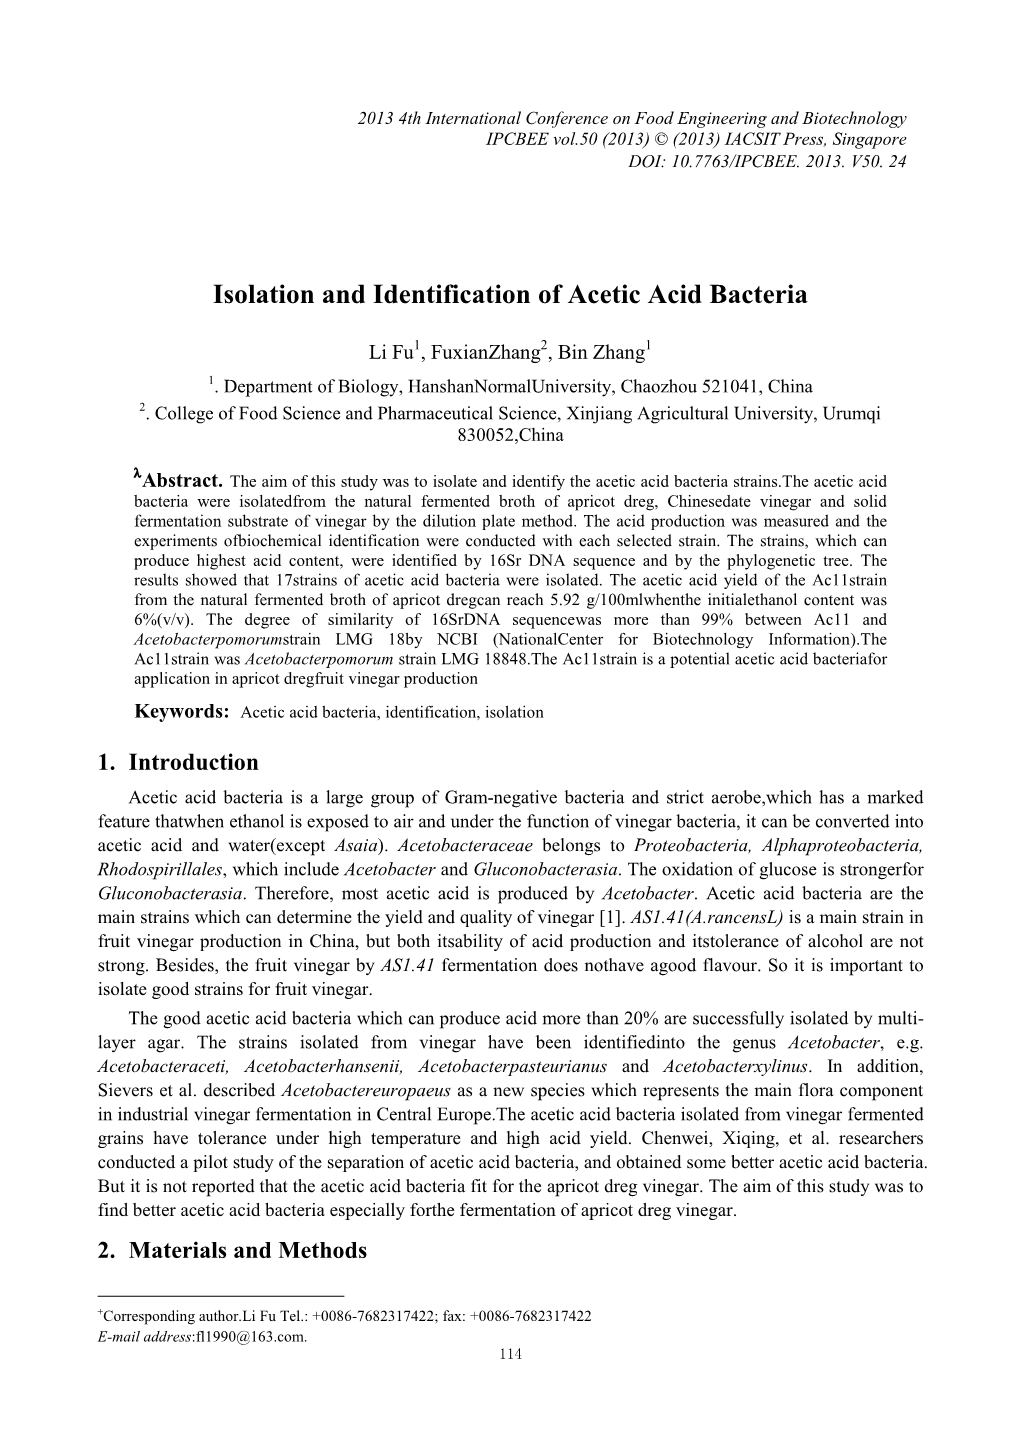 Isolation and Identification of Acetic Acid Bacteria